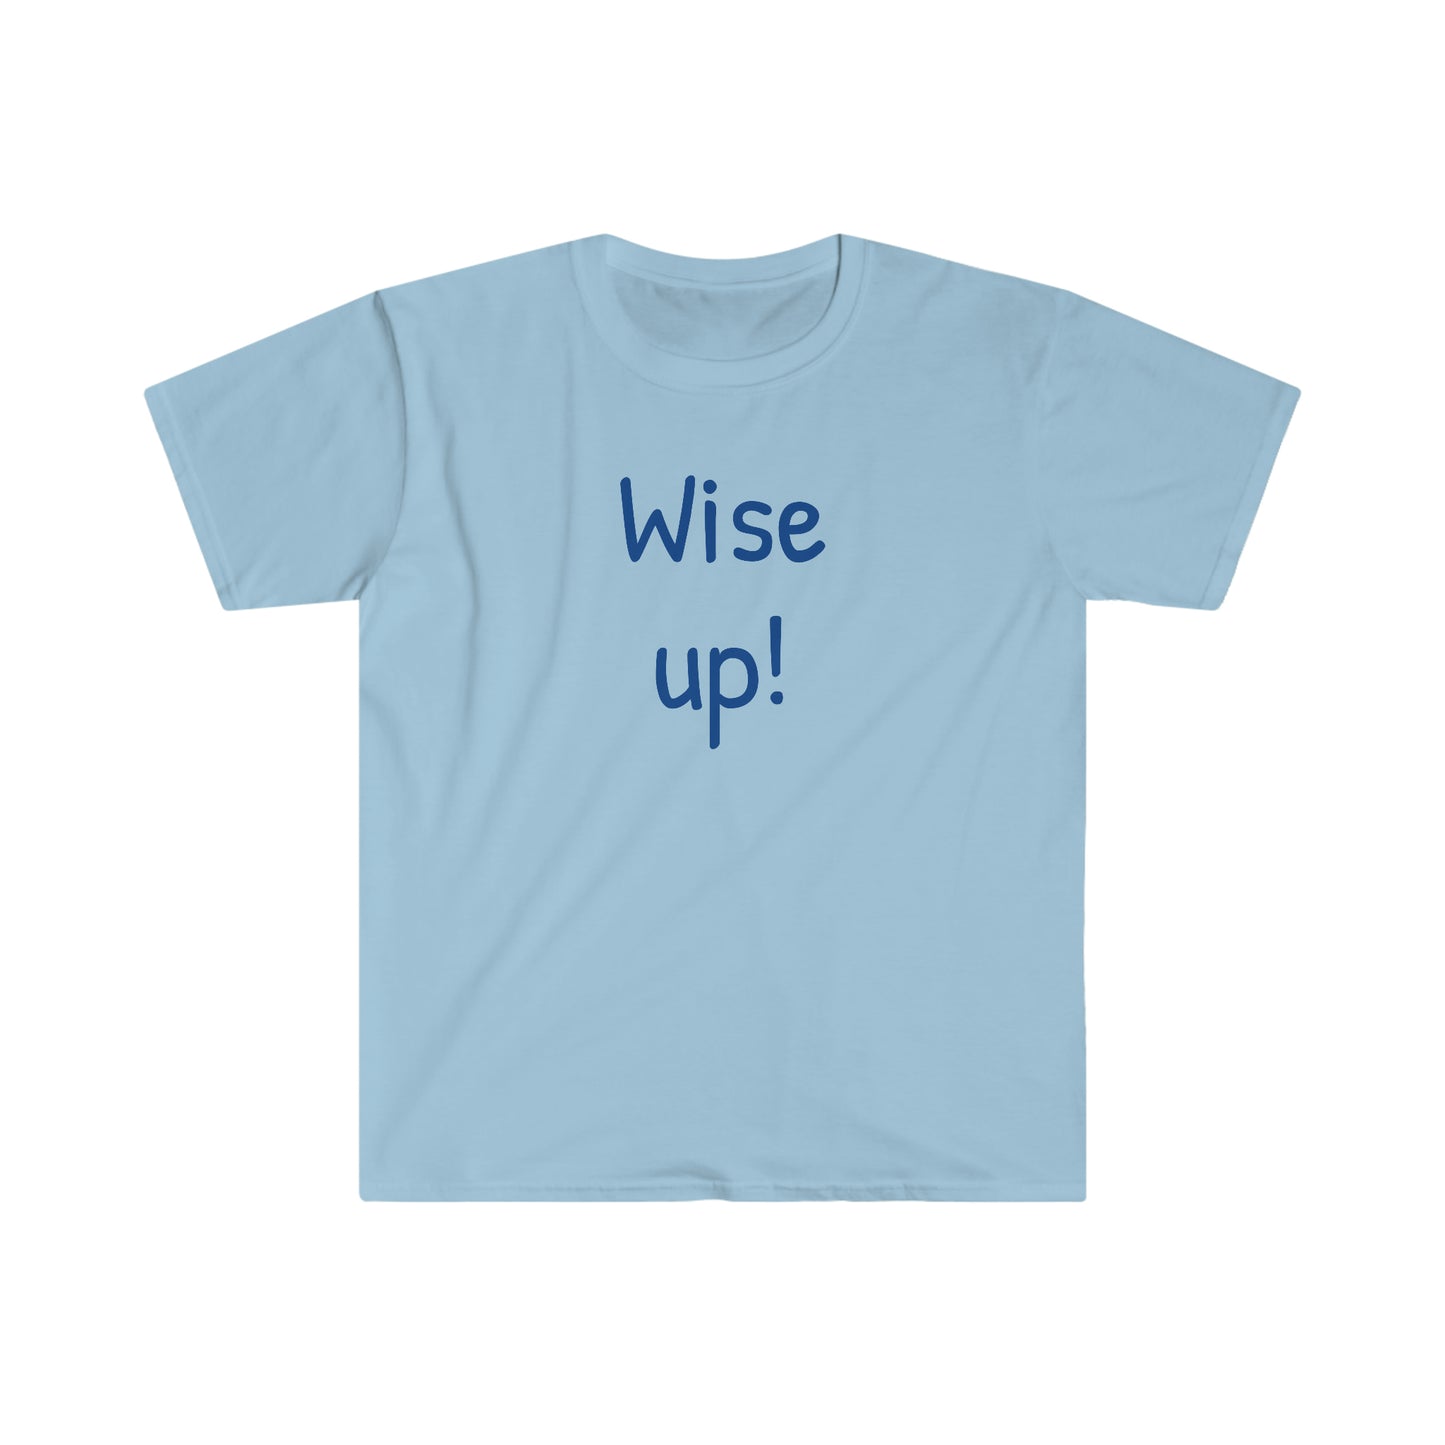 Wise up! T-shirt